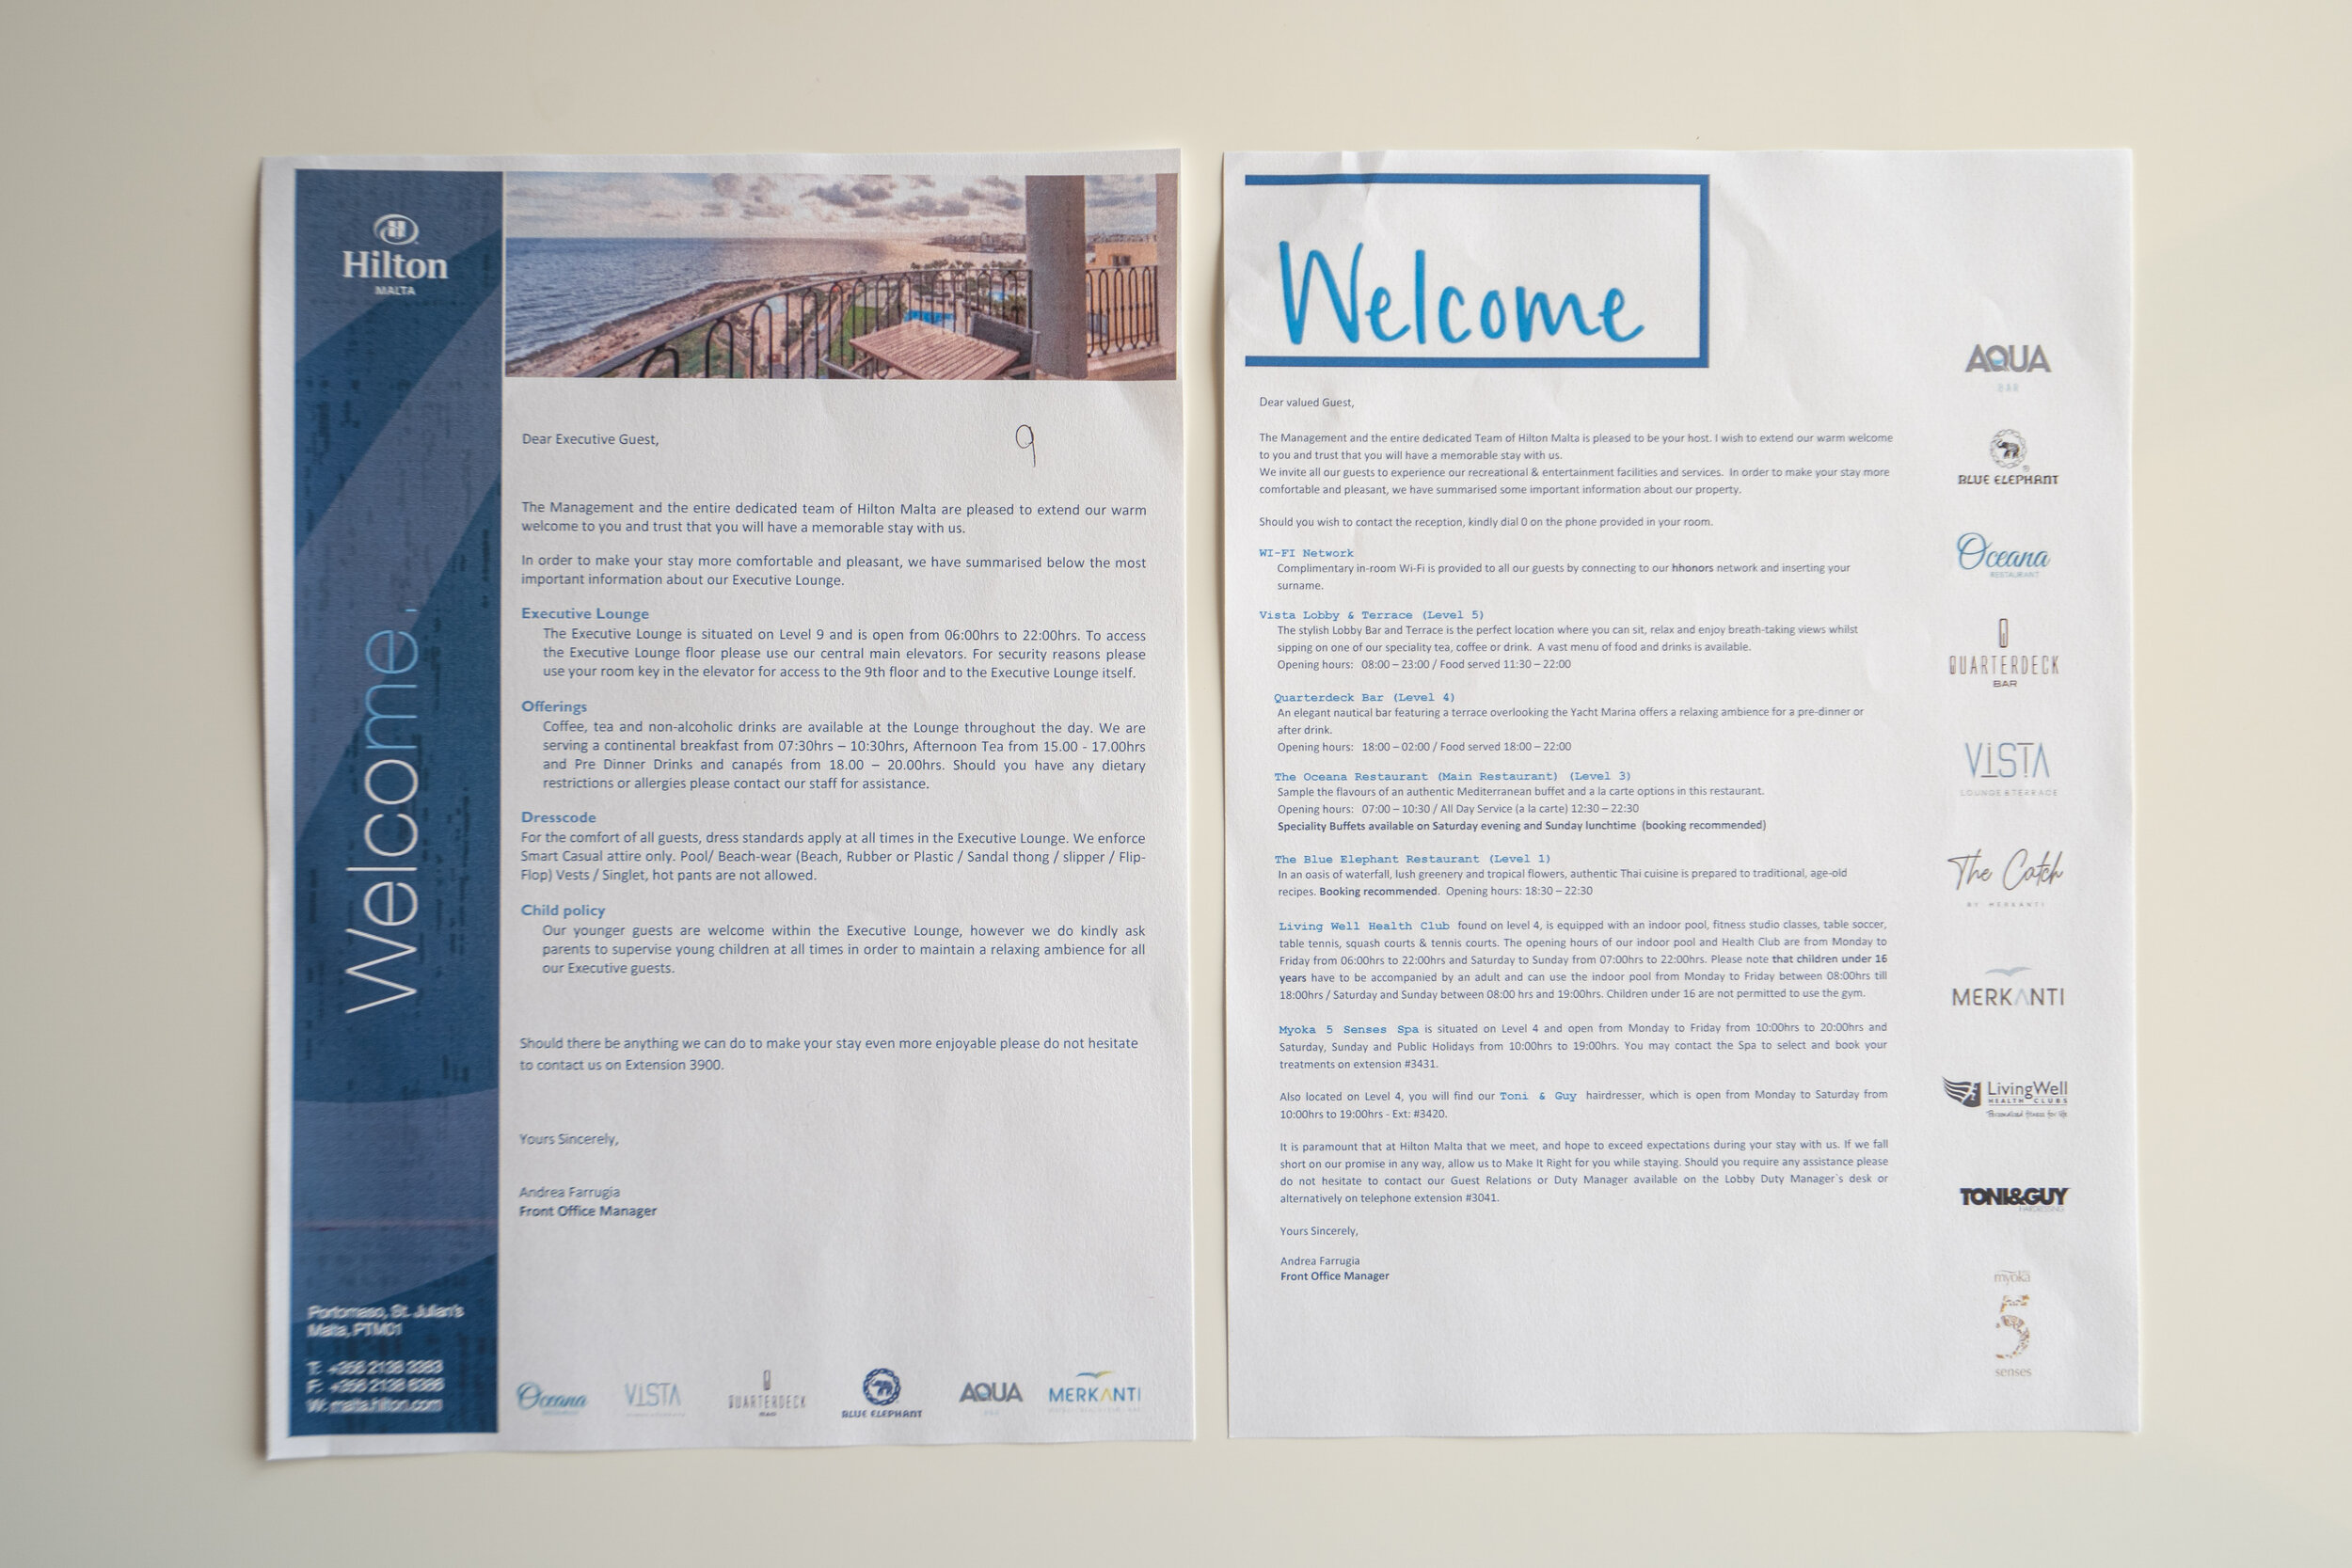 Welcome letters (click to enlarge)